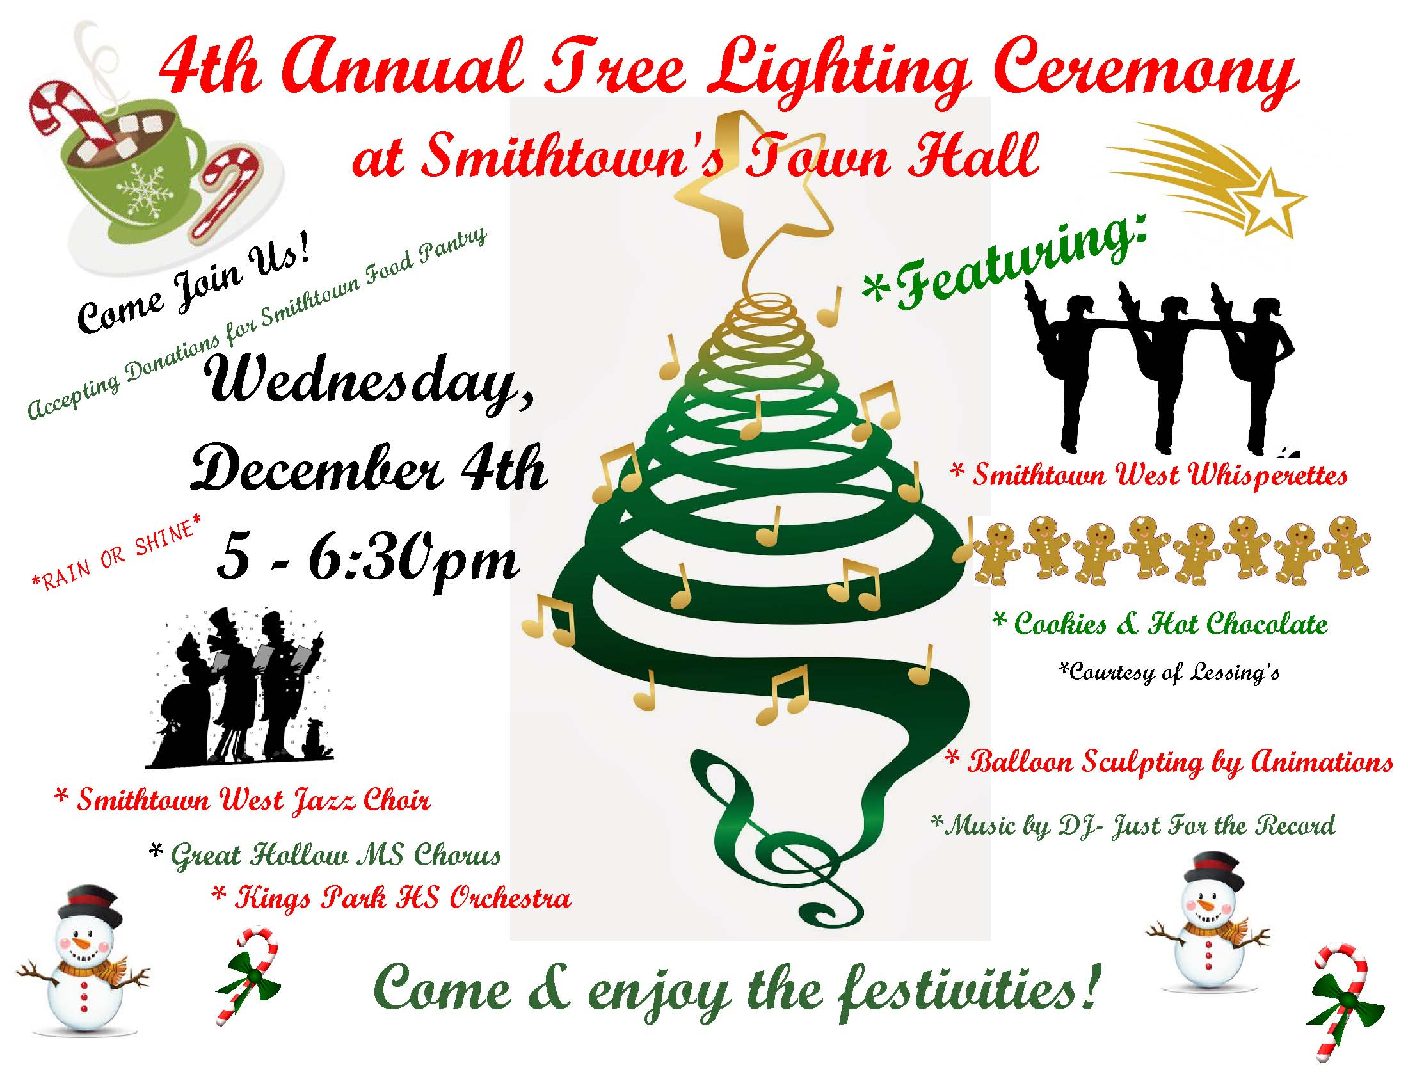 Smithtown’s 4th Annual Tree Lighting Ceremony